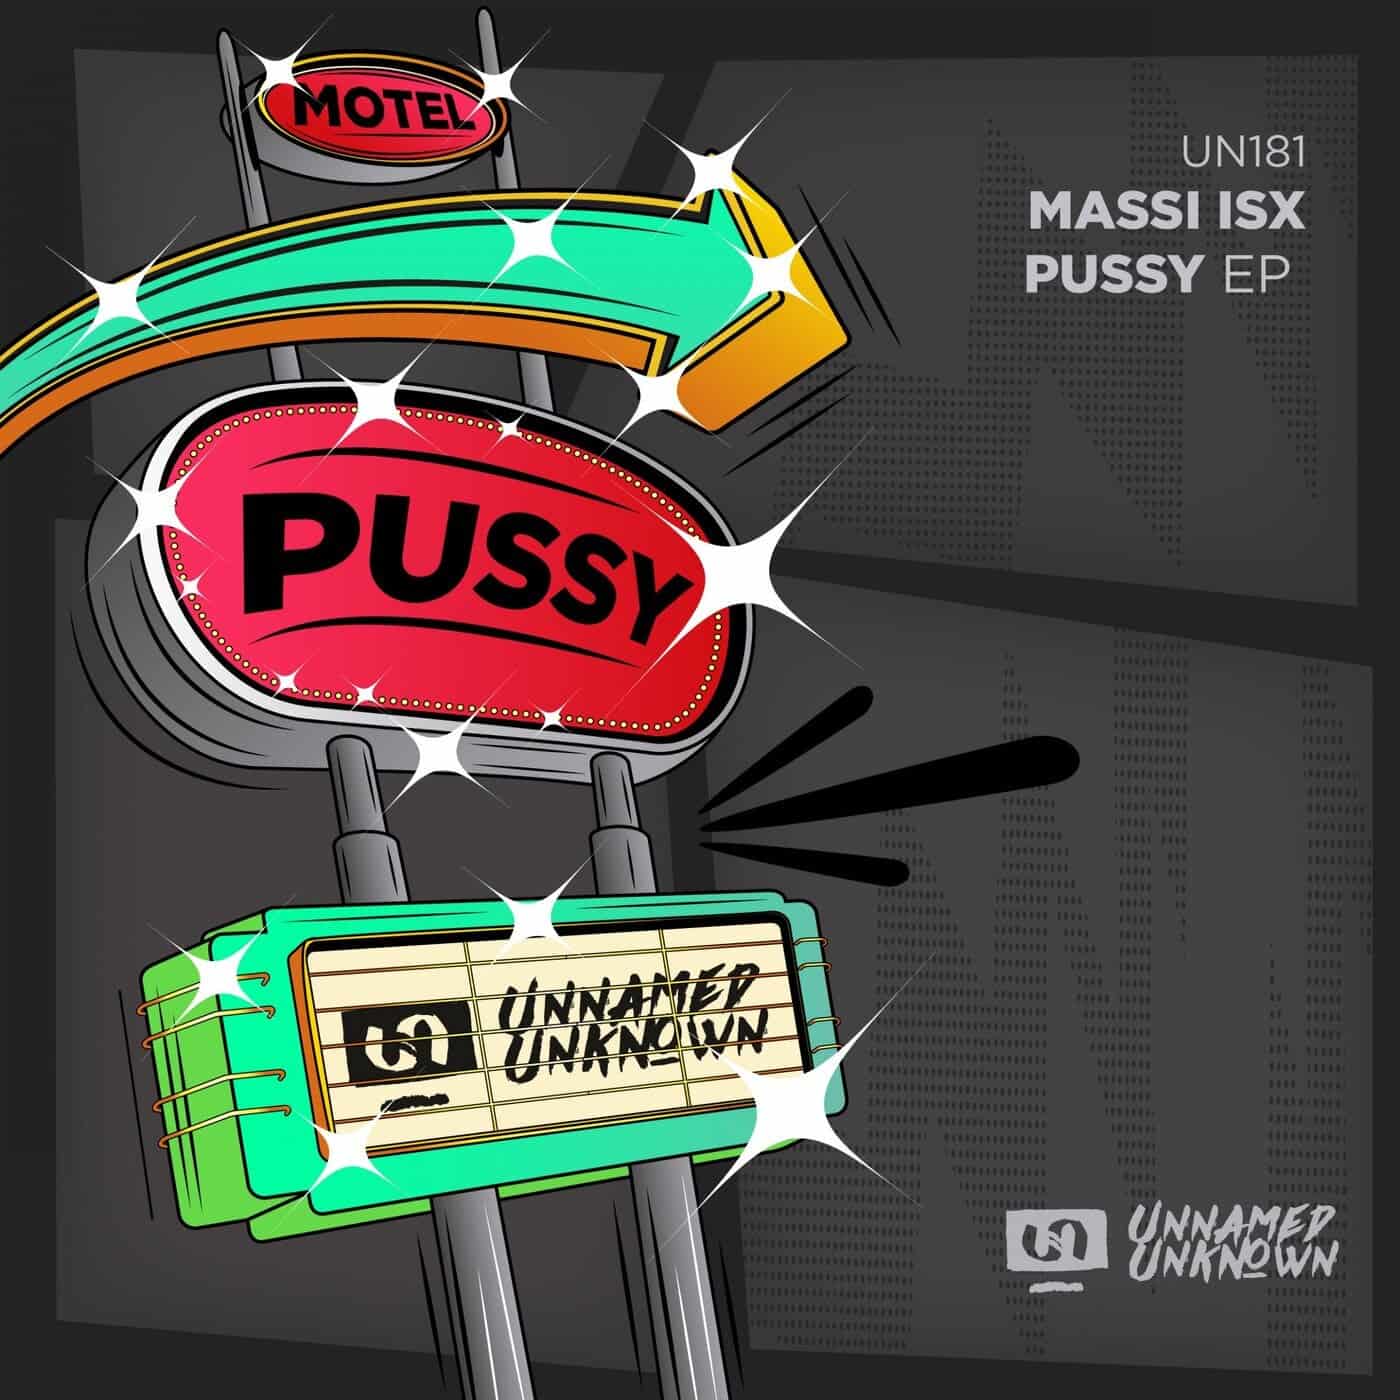 image cover: Massi ISX - Pussy / UN181